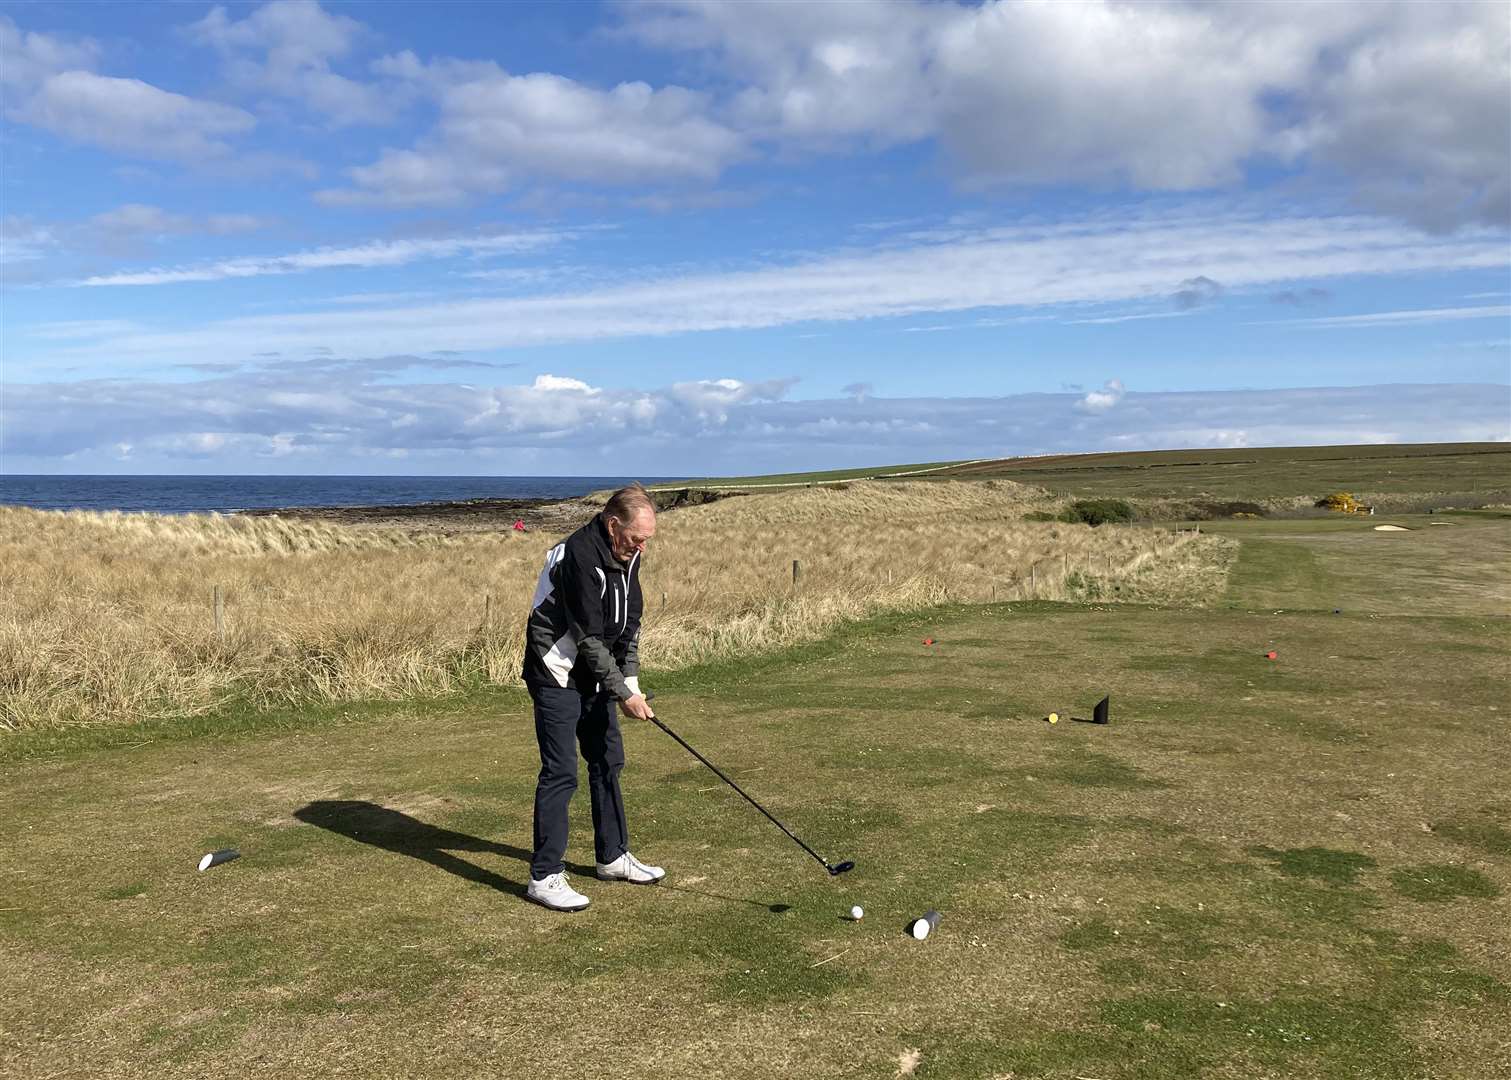 Murdo Macdonald, winner of this week's round of the North Point Distillery Senior Stableford competition, teeing off at the ninth hole.